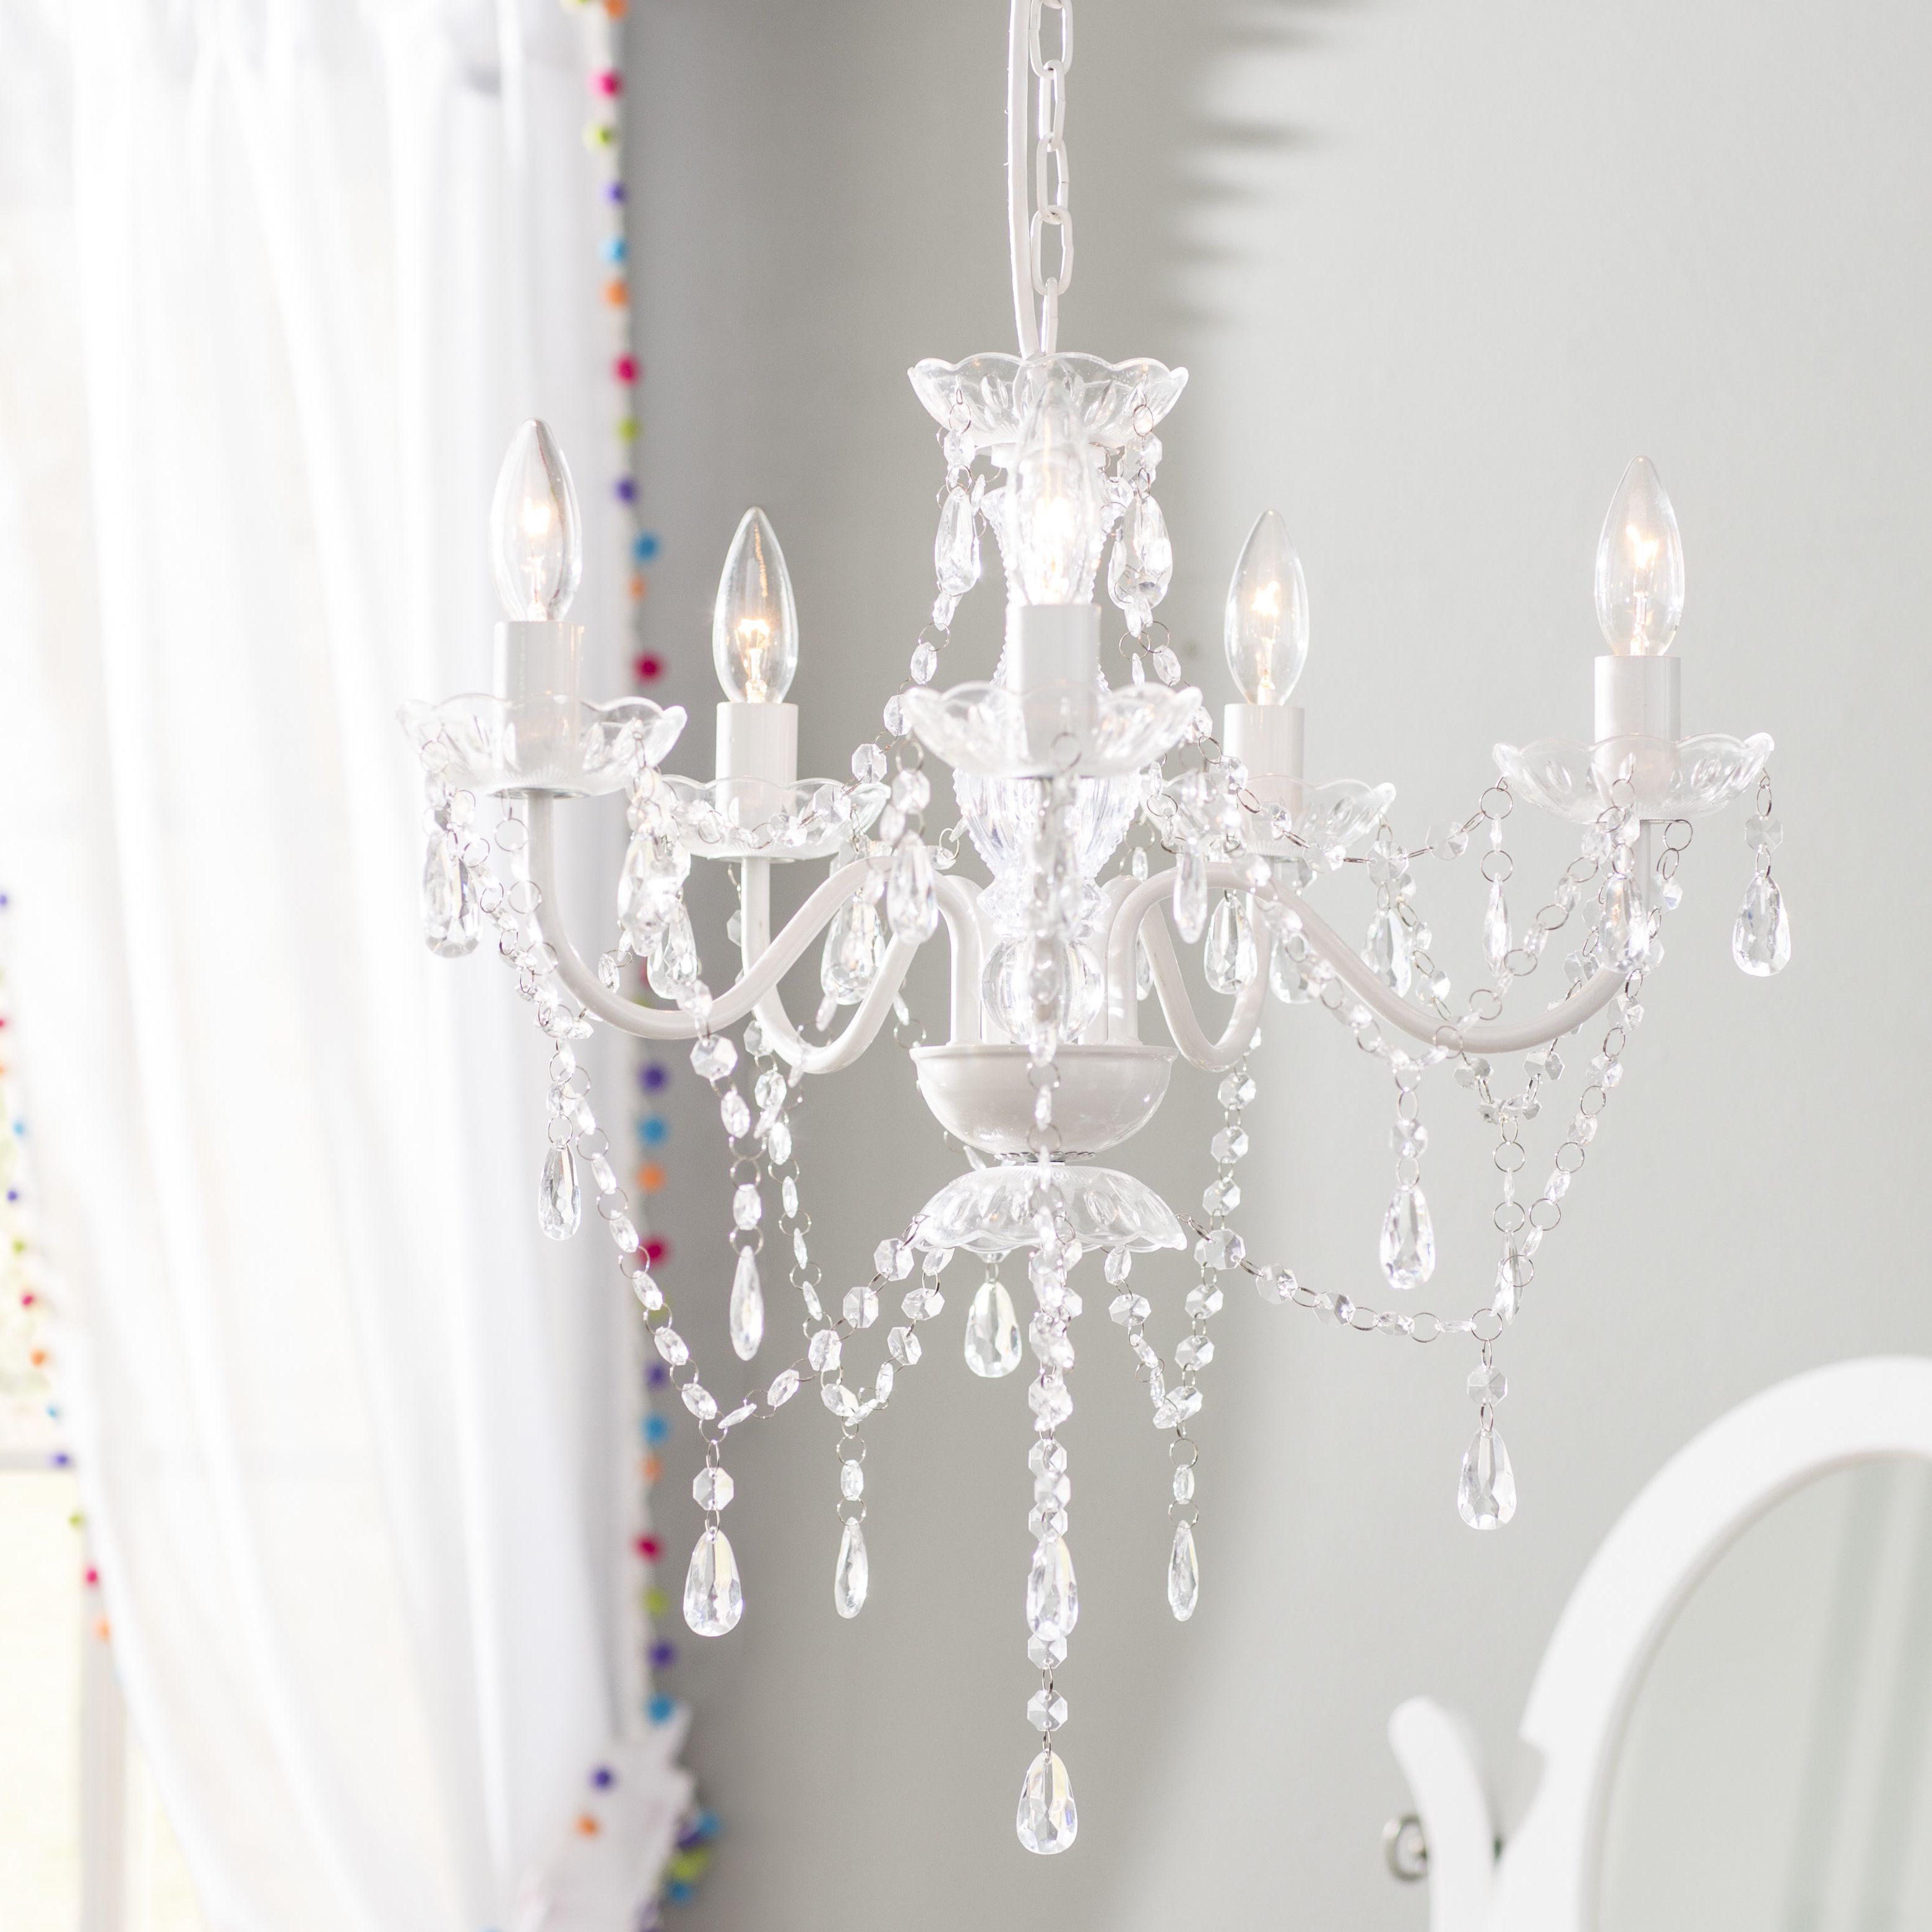 Aldora 4 Light Candle Style Chandeliers With Regard To Trendy Senoia 5 Light Candle Style Chandelier (View 23 of 25)